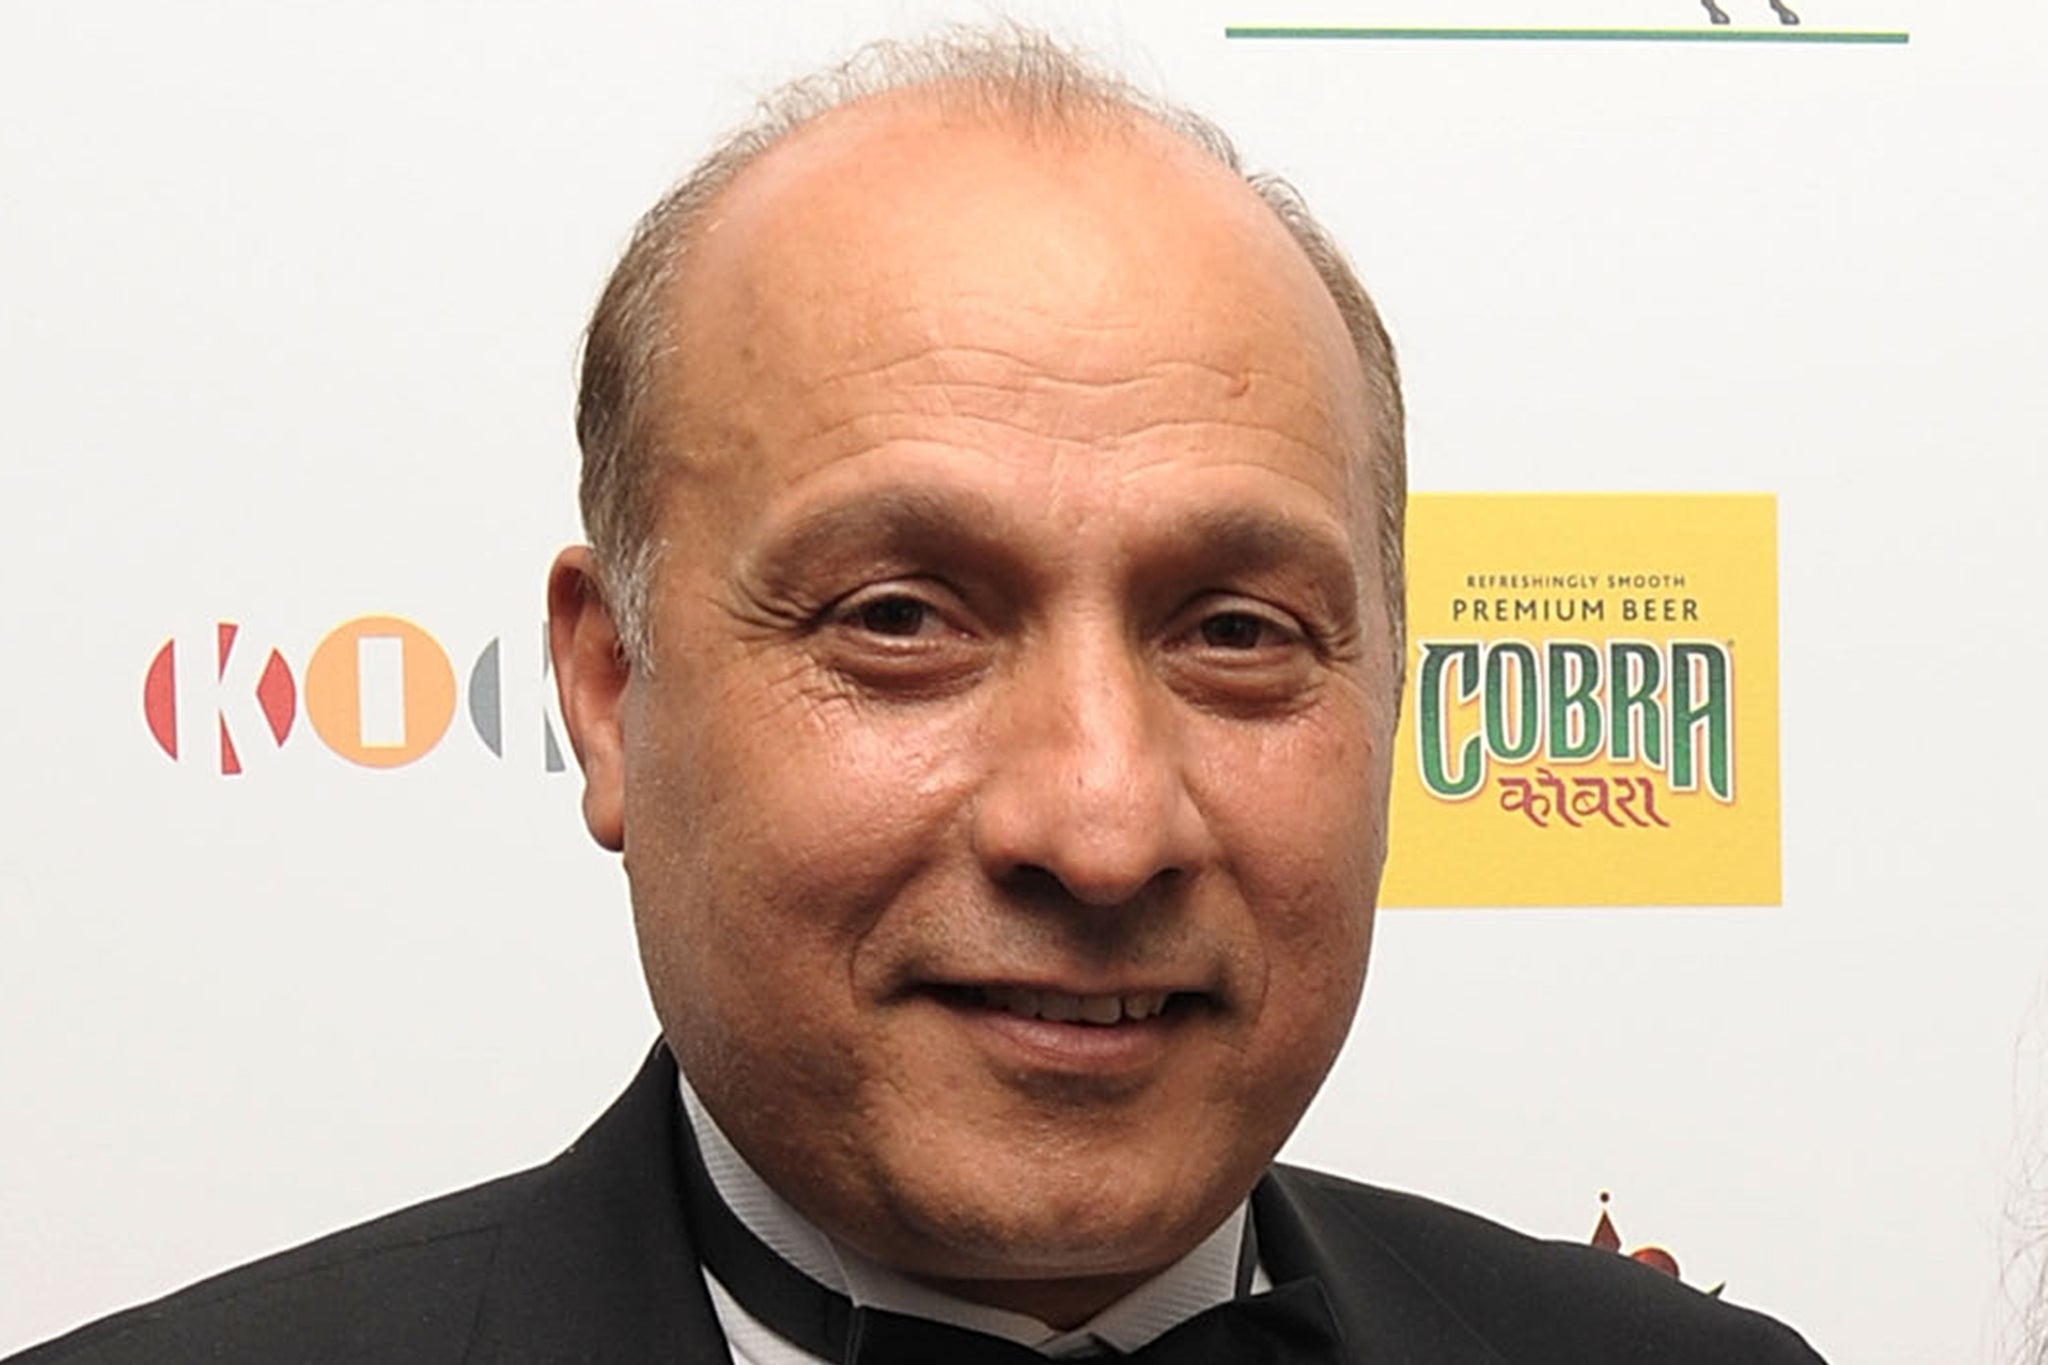 Surinder Arora is a former baggage handler who started his business empire with four derelict houses near Heathrow